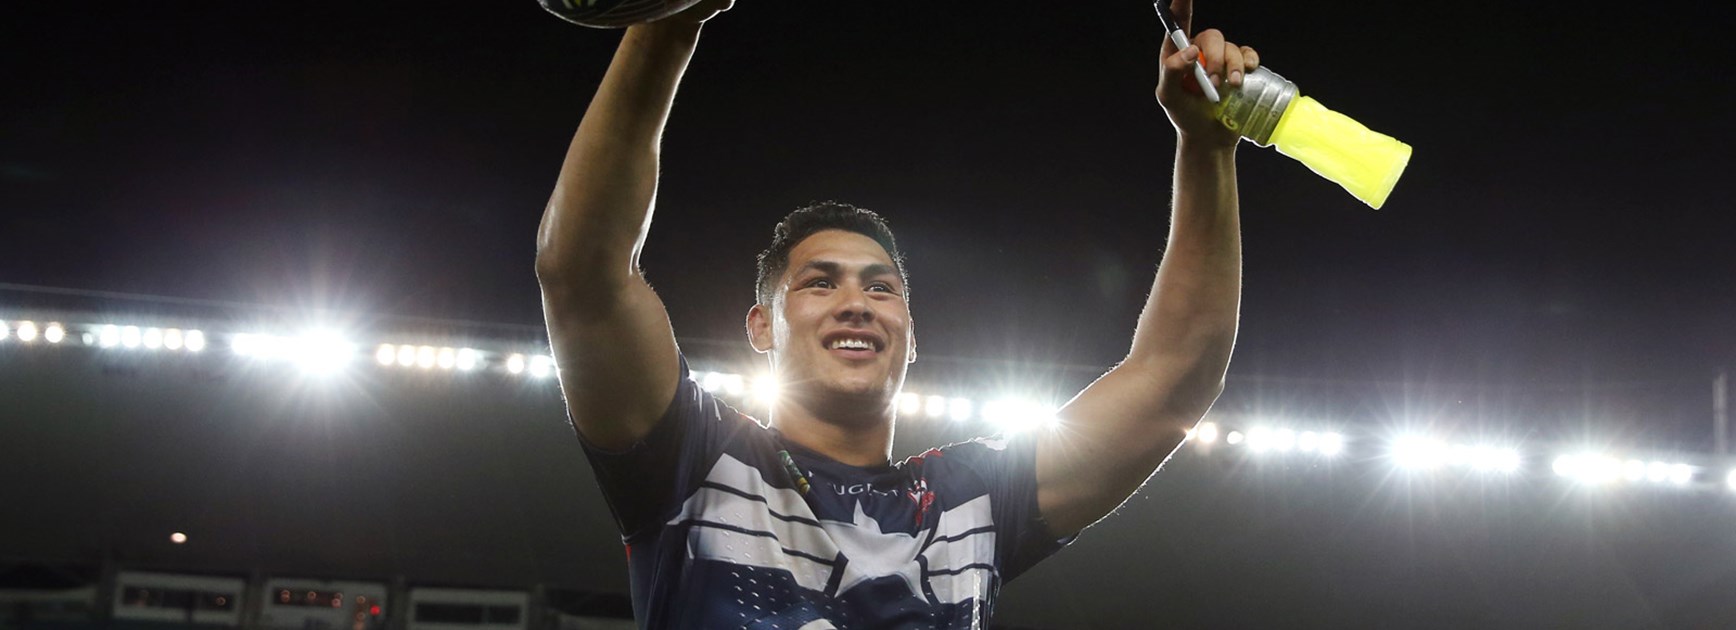 Roger Tuivasa-Sheck scored a try against the Bulldogs at Allianz Stadium.